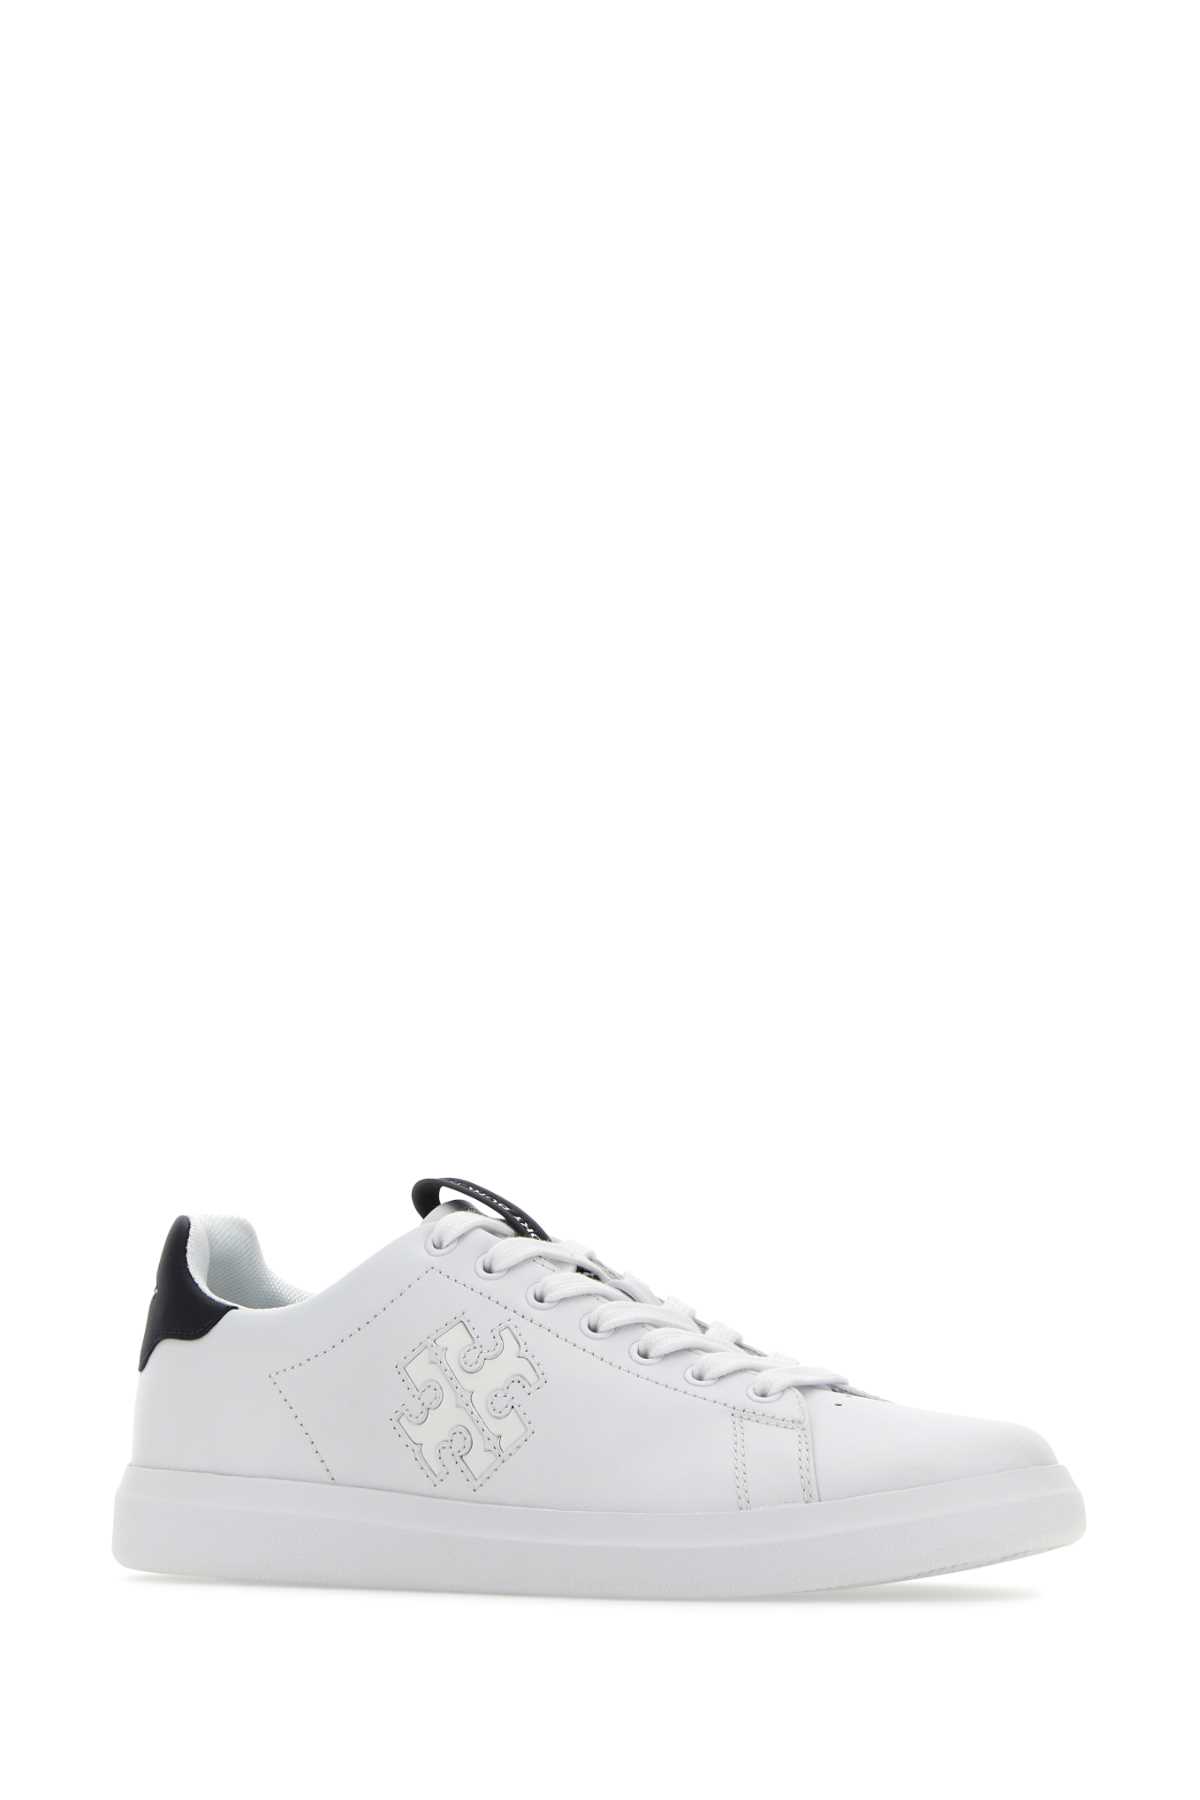 Shop Tory Burch Chalk Leather Howell Court Sneakers In Whiteperfectnavy